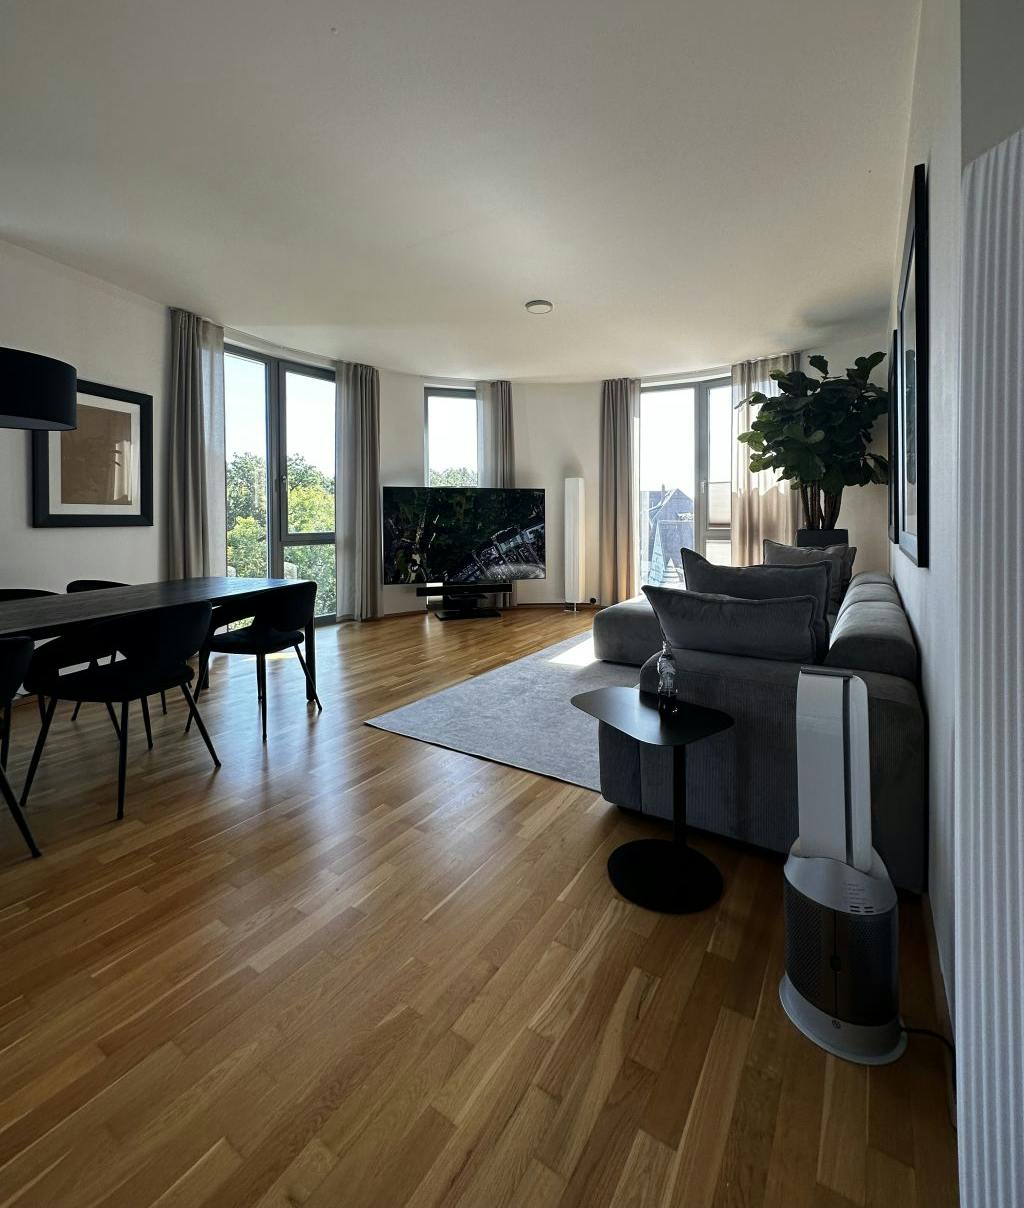 Exclusive Luxury Apartment in the Heart of Waldstrasse Quarter - Your Dream Home!